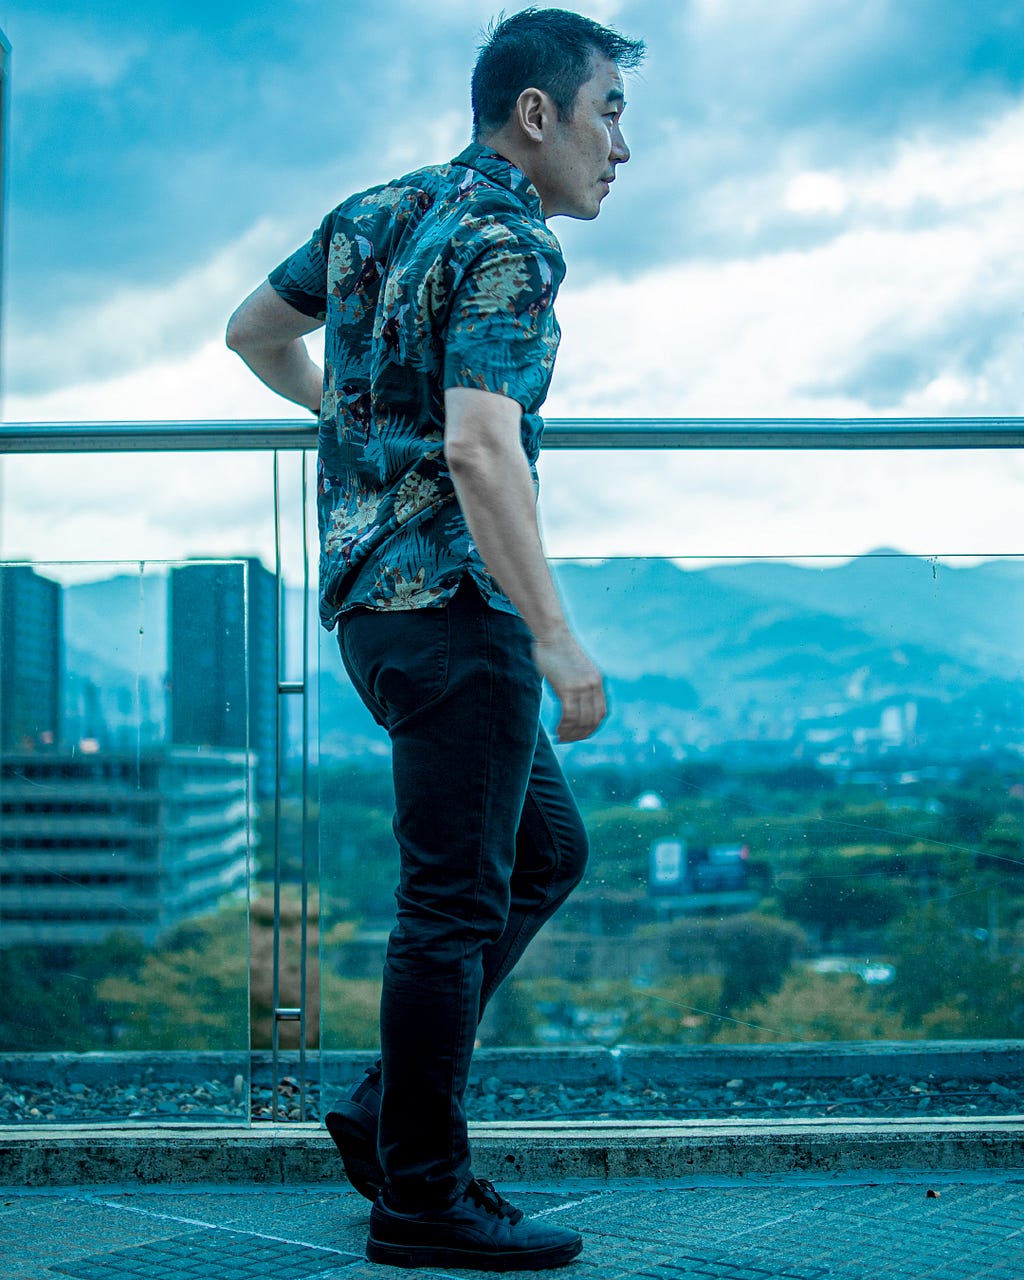 Overseeing the city of Medellin at the Medellin Modern Art Museum — Wearing floral shirt and emerald pants with black Puma tennis shoes. Men style and fashion in Latin America — Status detox in Medellin — post